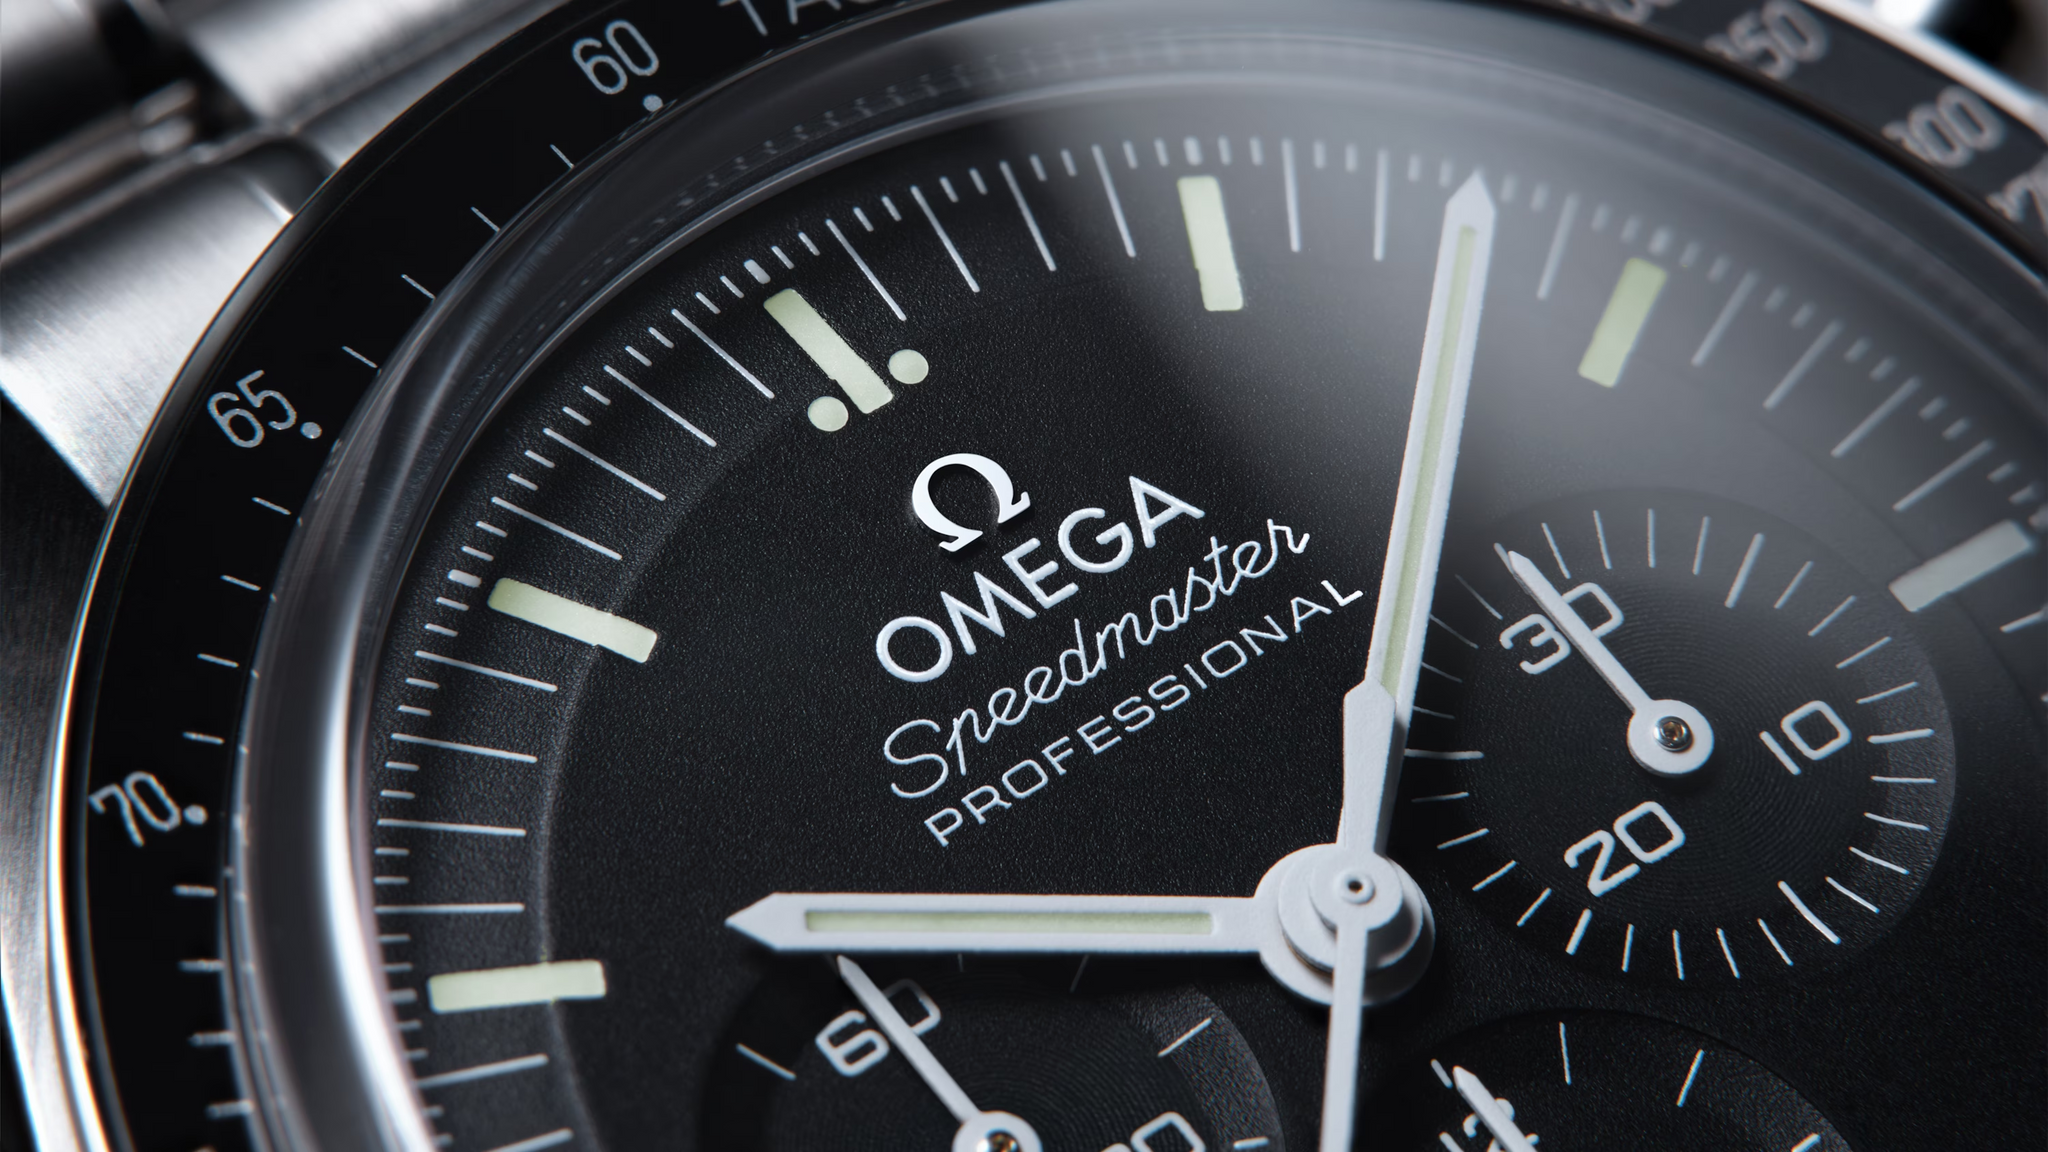 OMEGA-SPEEDMASTER MOONWATCH PROFESSIONAL CO‑AXIAL MASTER CHRONOMETER CHRONOGRAPH 42 MM 310.30.42.50.01.002